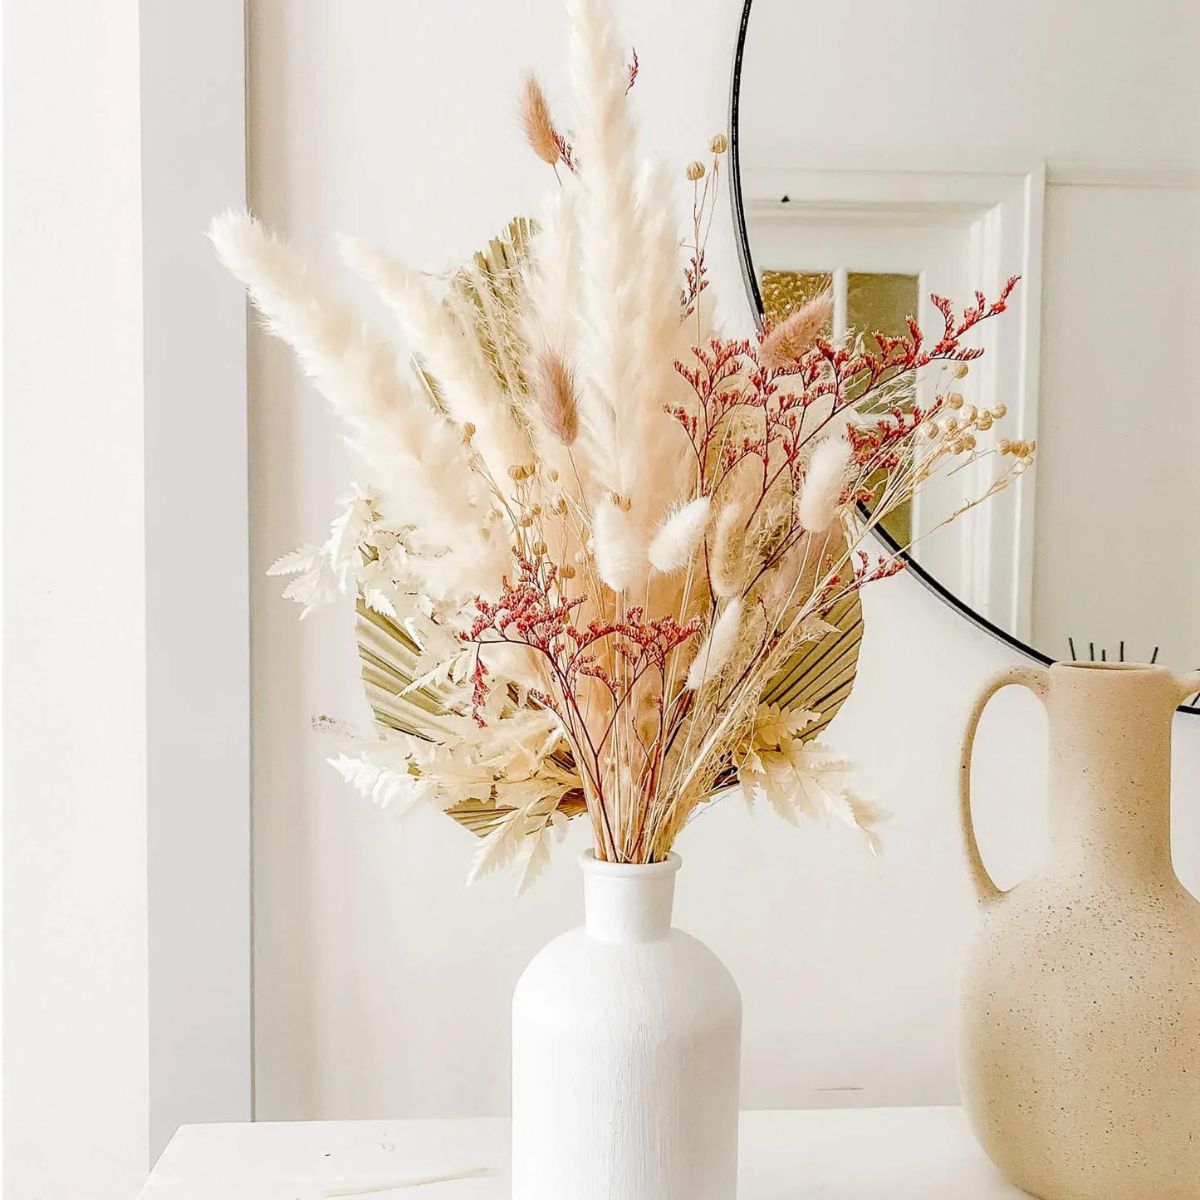 Dried flower bouquet with pampas grass mixed in it for the perfect house decoration on Thursd